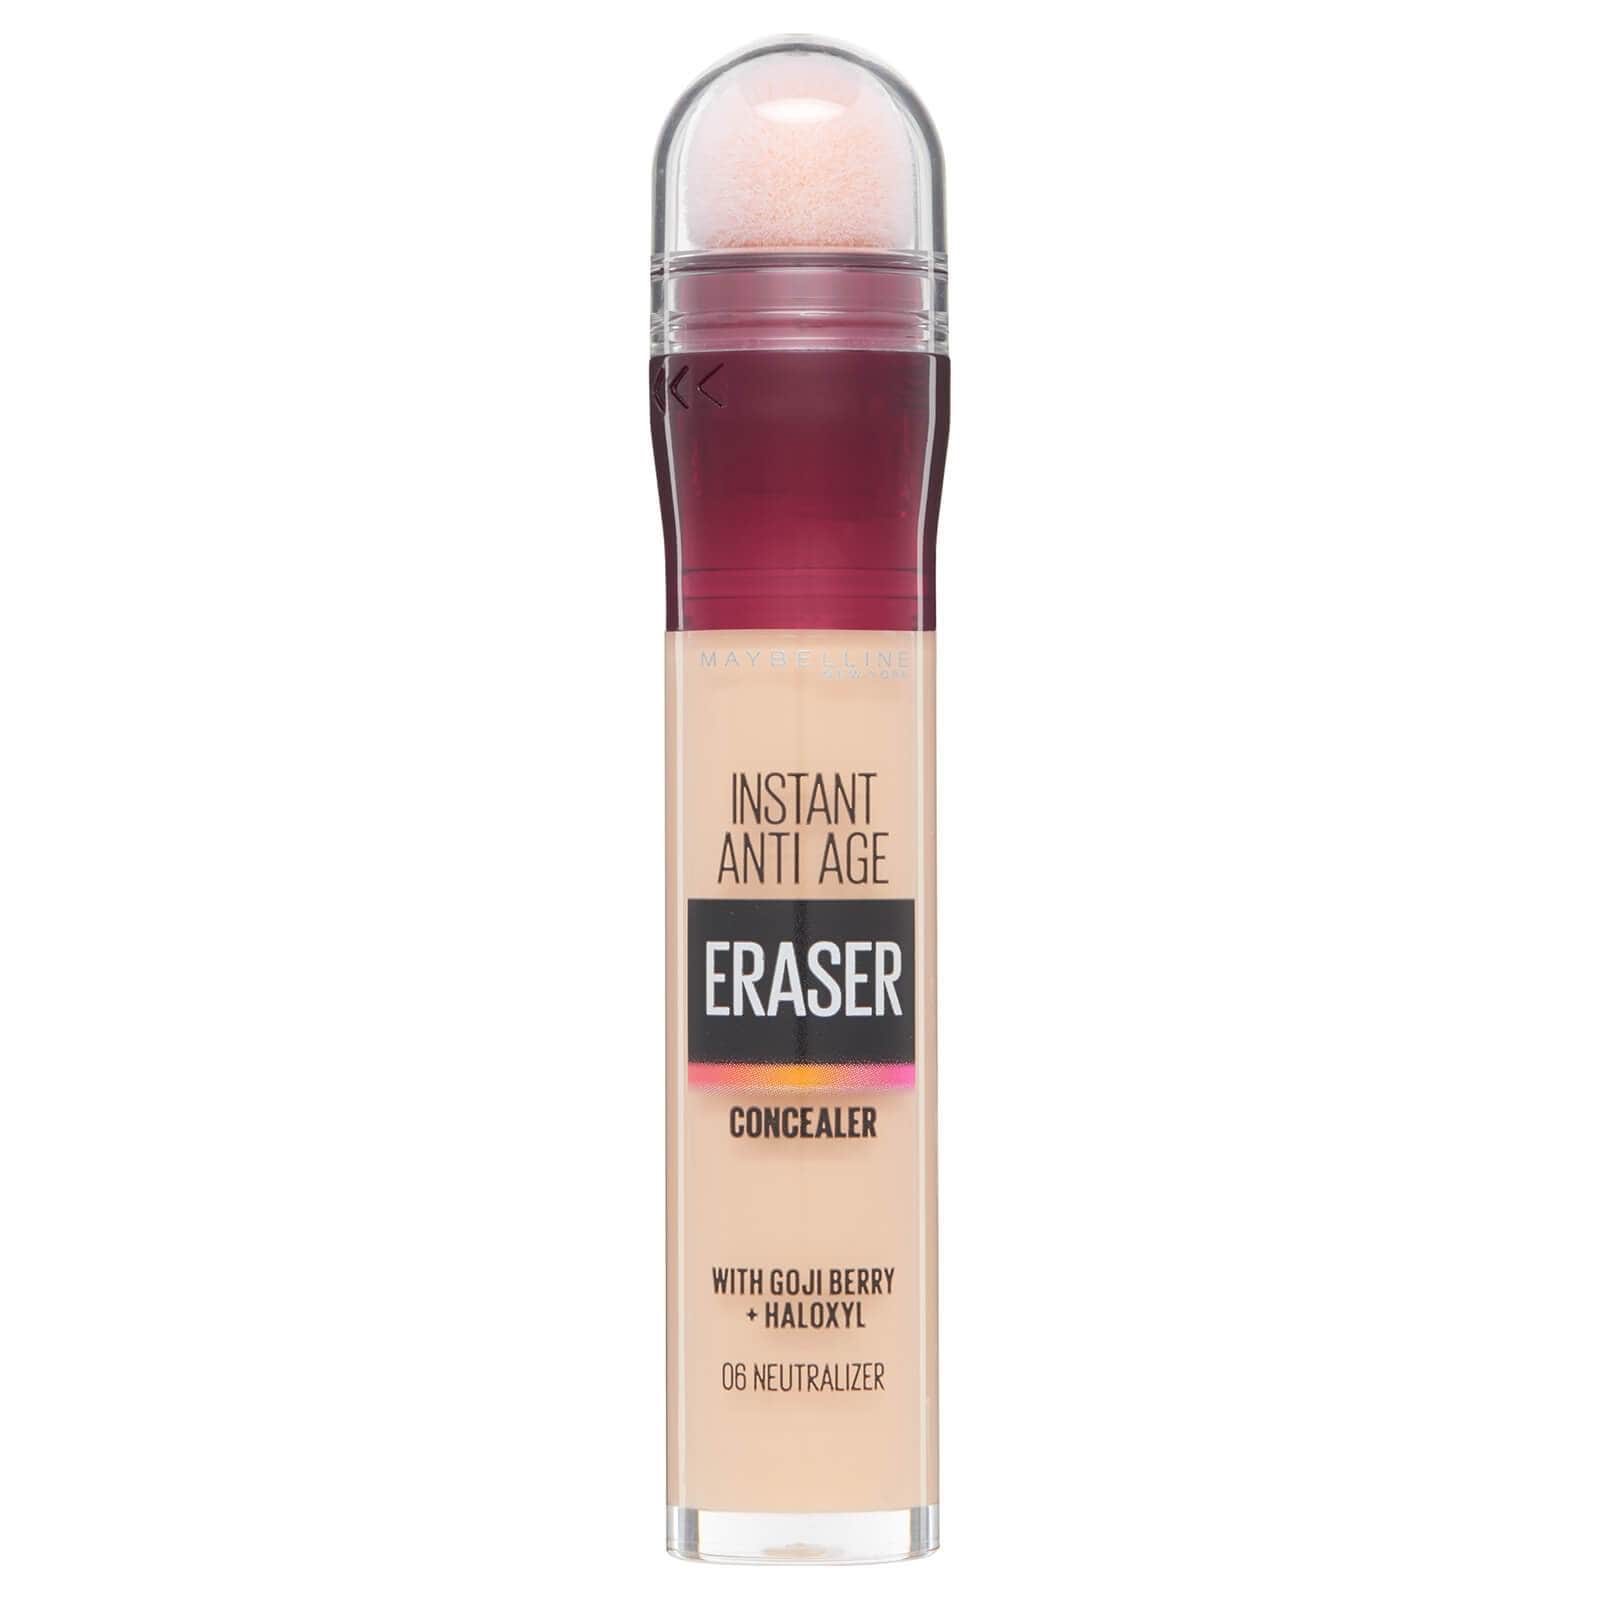 Instant Anti Age Eraser Multi-Use Concealer - Give Us Beauty